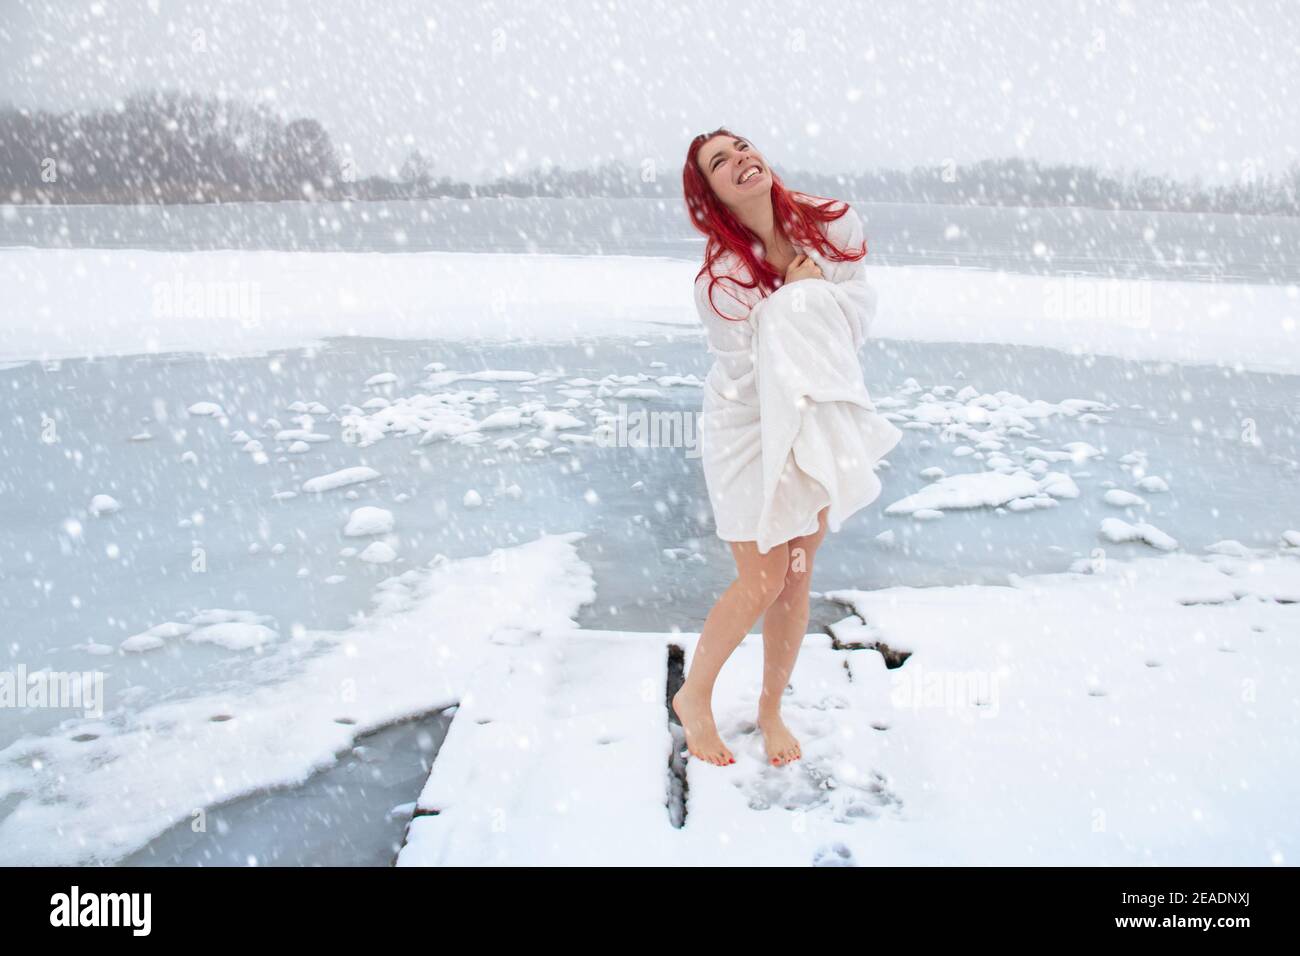 Happy woman hardening and winter swimming concept. Barefoot female enjoying cold snowy weather on an icy lake Stock Photo